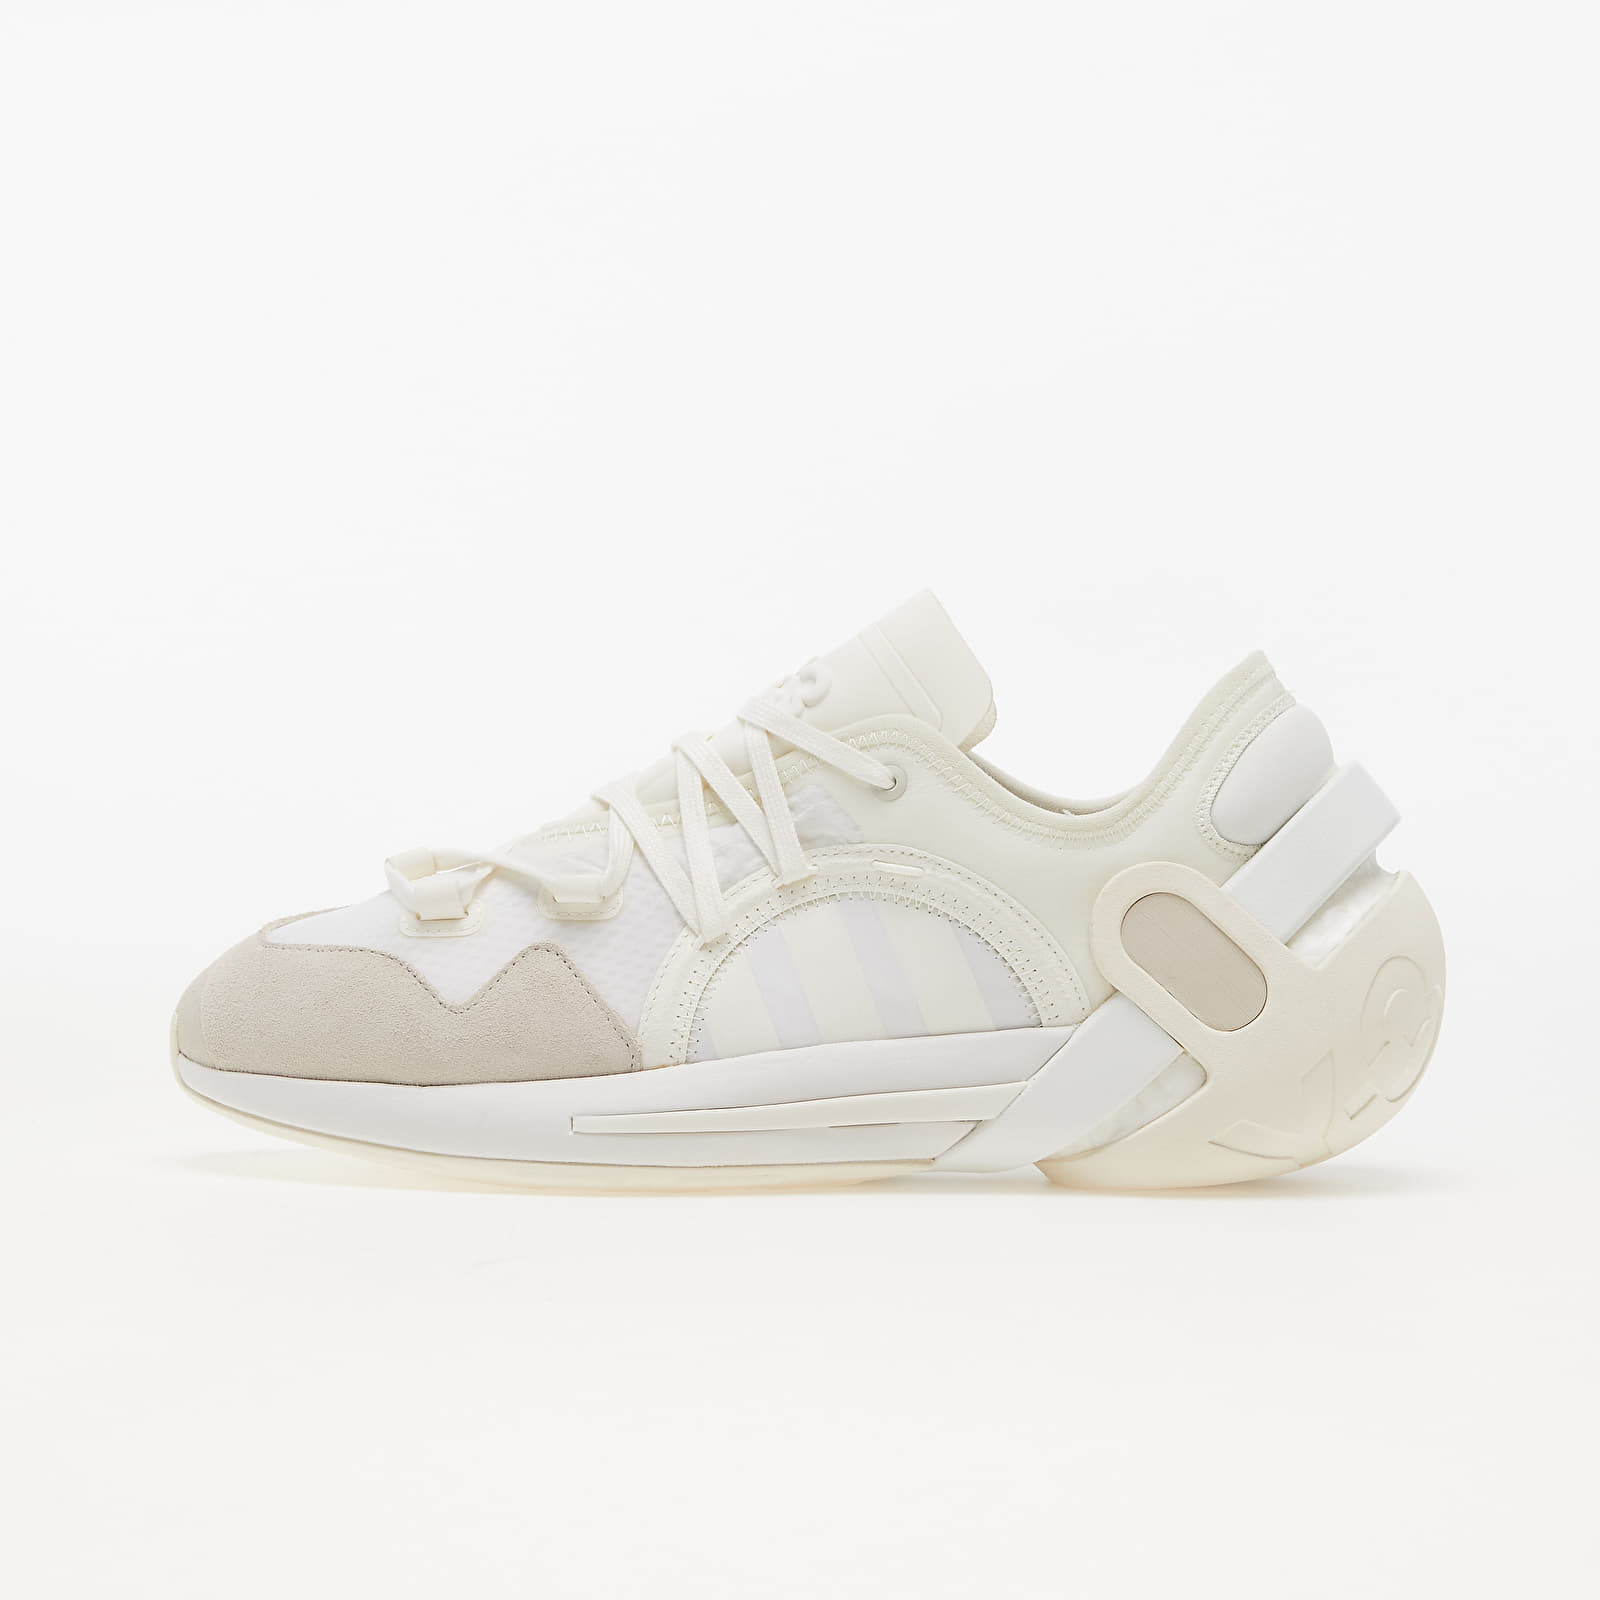 Men's shoes Y-3 Idoso BOOST Off White/ Clear Brown/ Core White